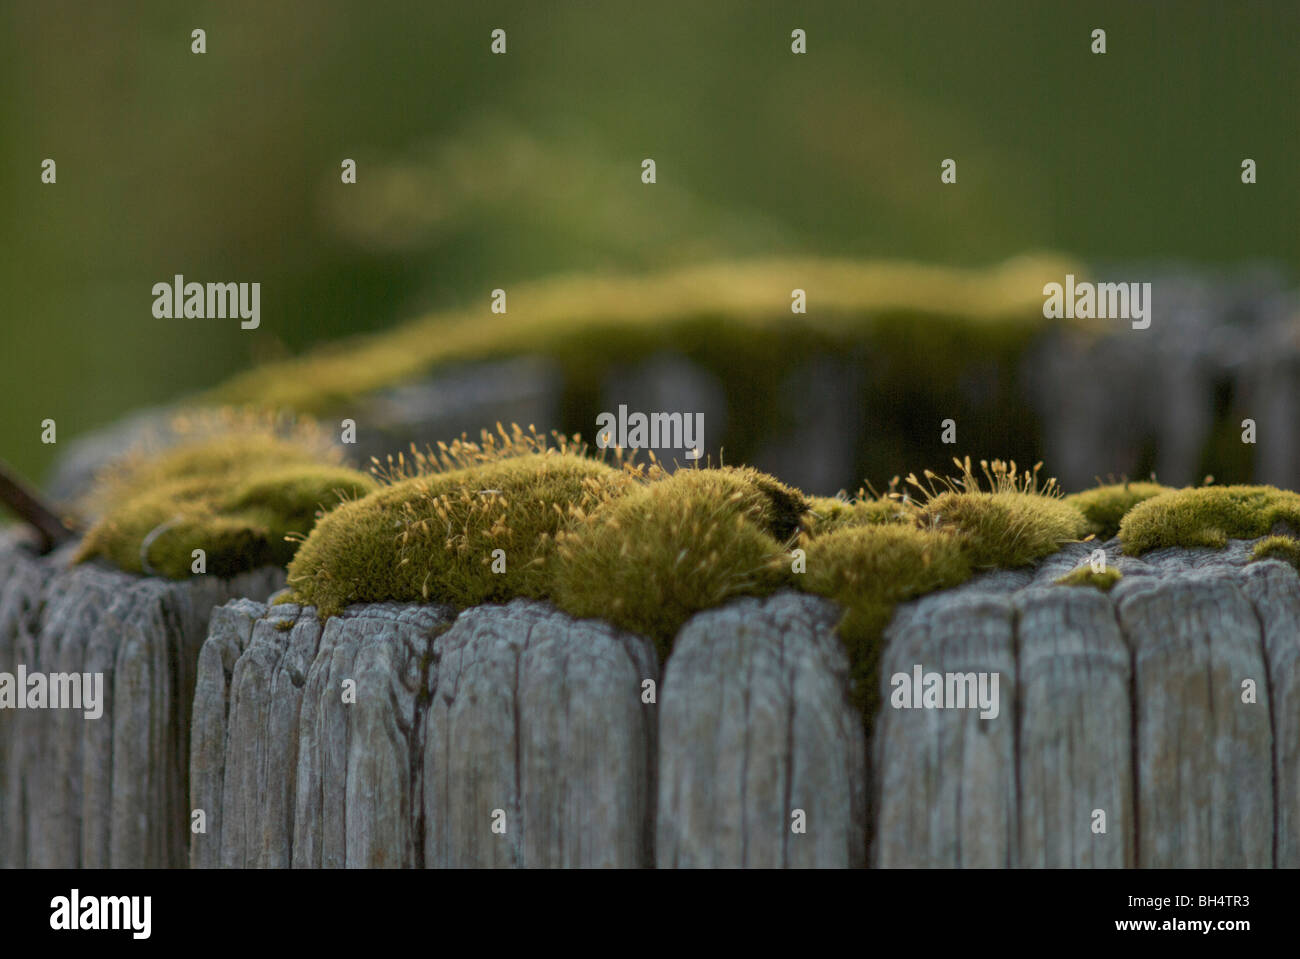 White Cushion Moss - Stock Image - C001/6061 - Science Photo Library